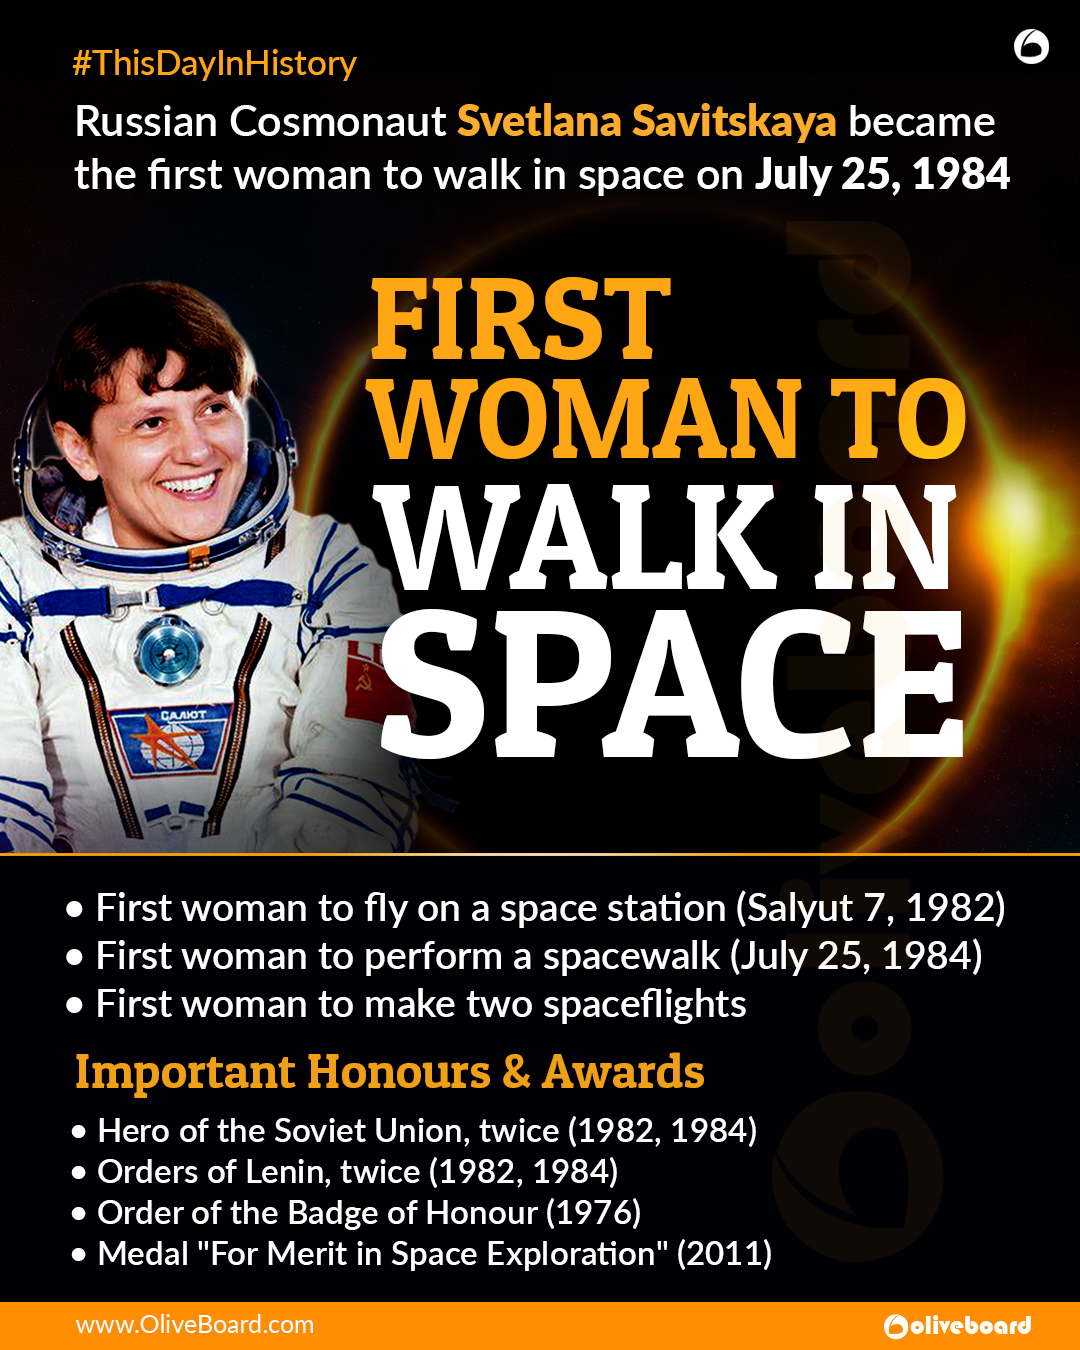 Oliveboard on Twitter: "#ThisDayInHistory | Russian Cosmonaut Svetlana Savitskaya became the first woman to walk in space on July 25, 1984 . . Get Free eBooks here: https://t.co/0ru4G84VMa . . #Cosmonaut #Spacestation #